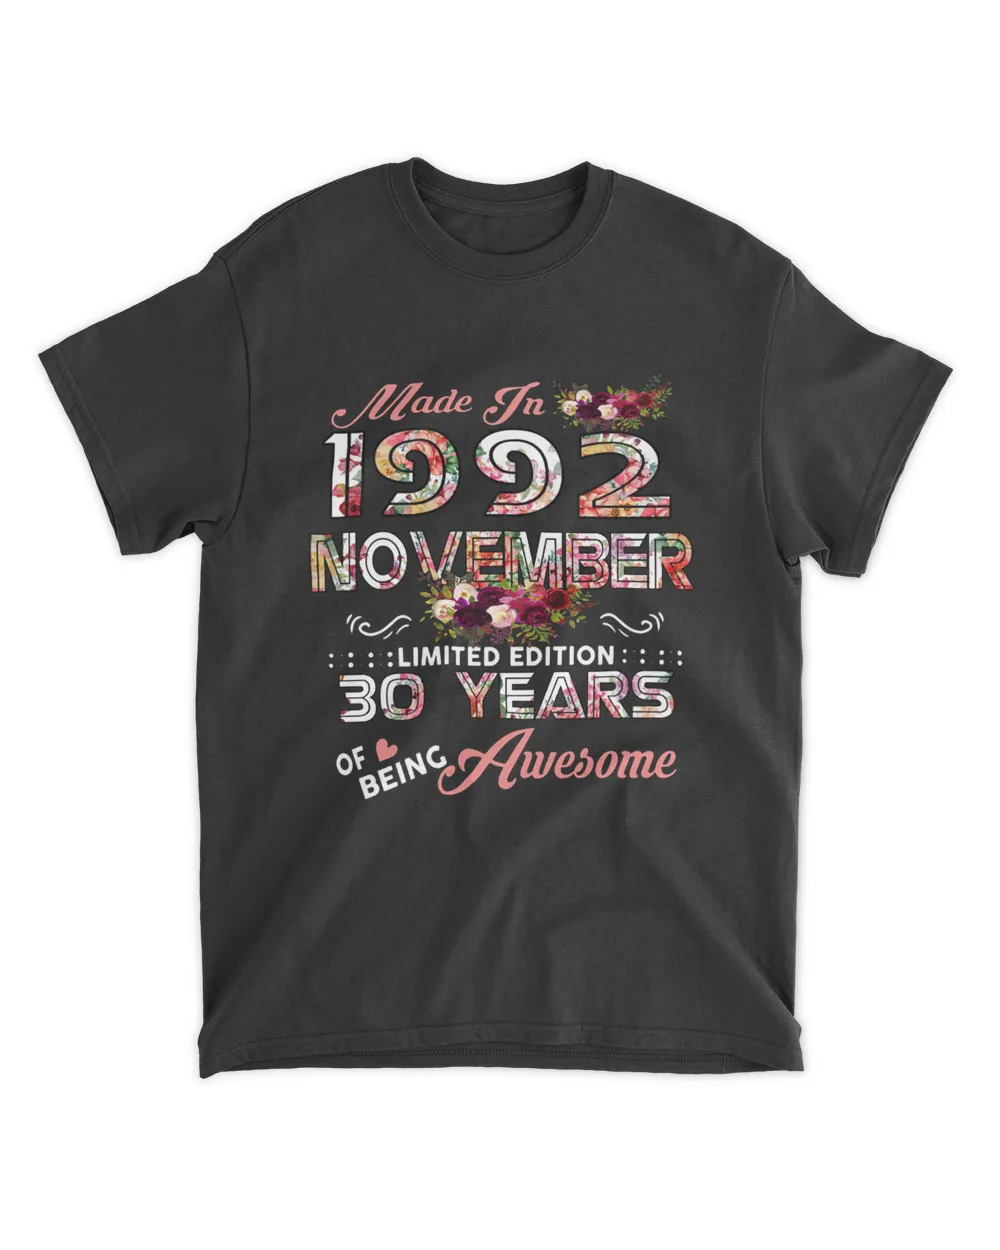 Vintage 1992 T shirt - Made in November 1992 30 Years of Being Awesome Flowers